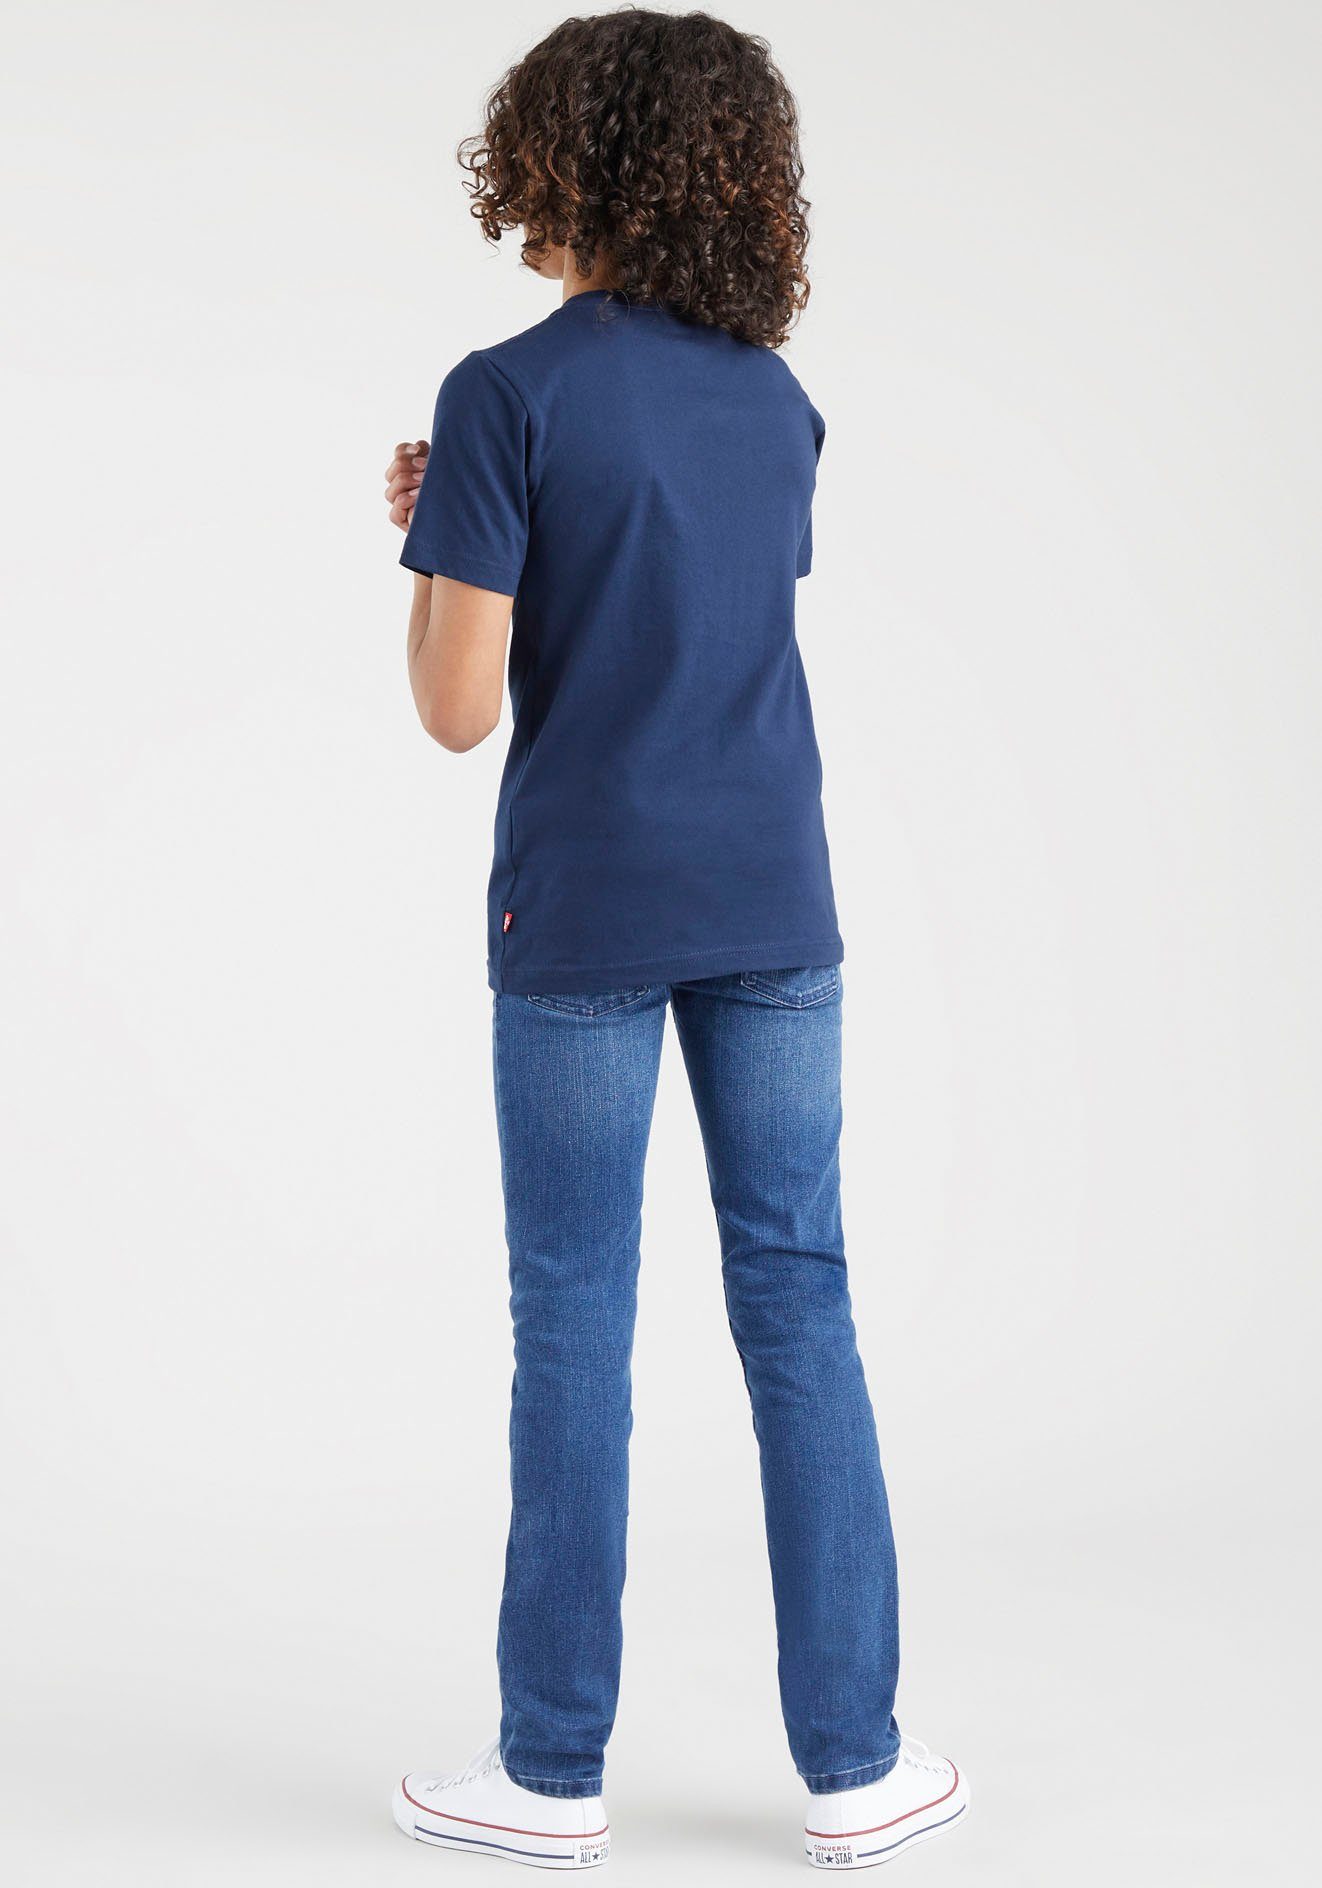 CHEST T-Shirt BATWING for Levi's® HIT navy BOYS Kids